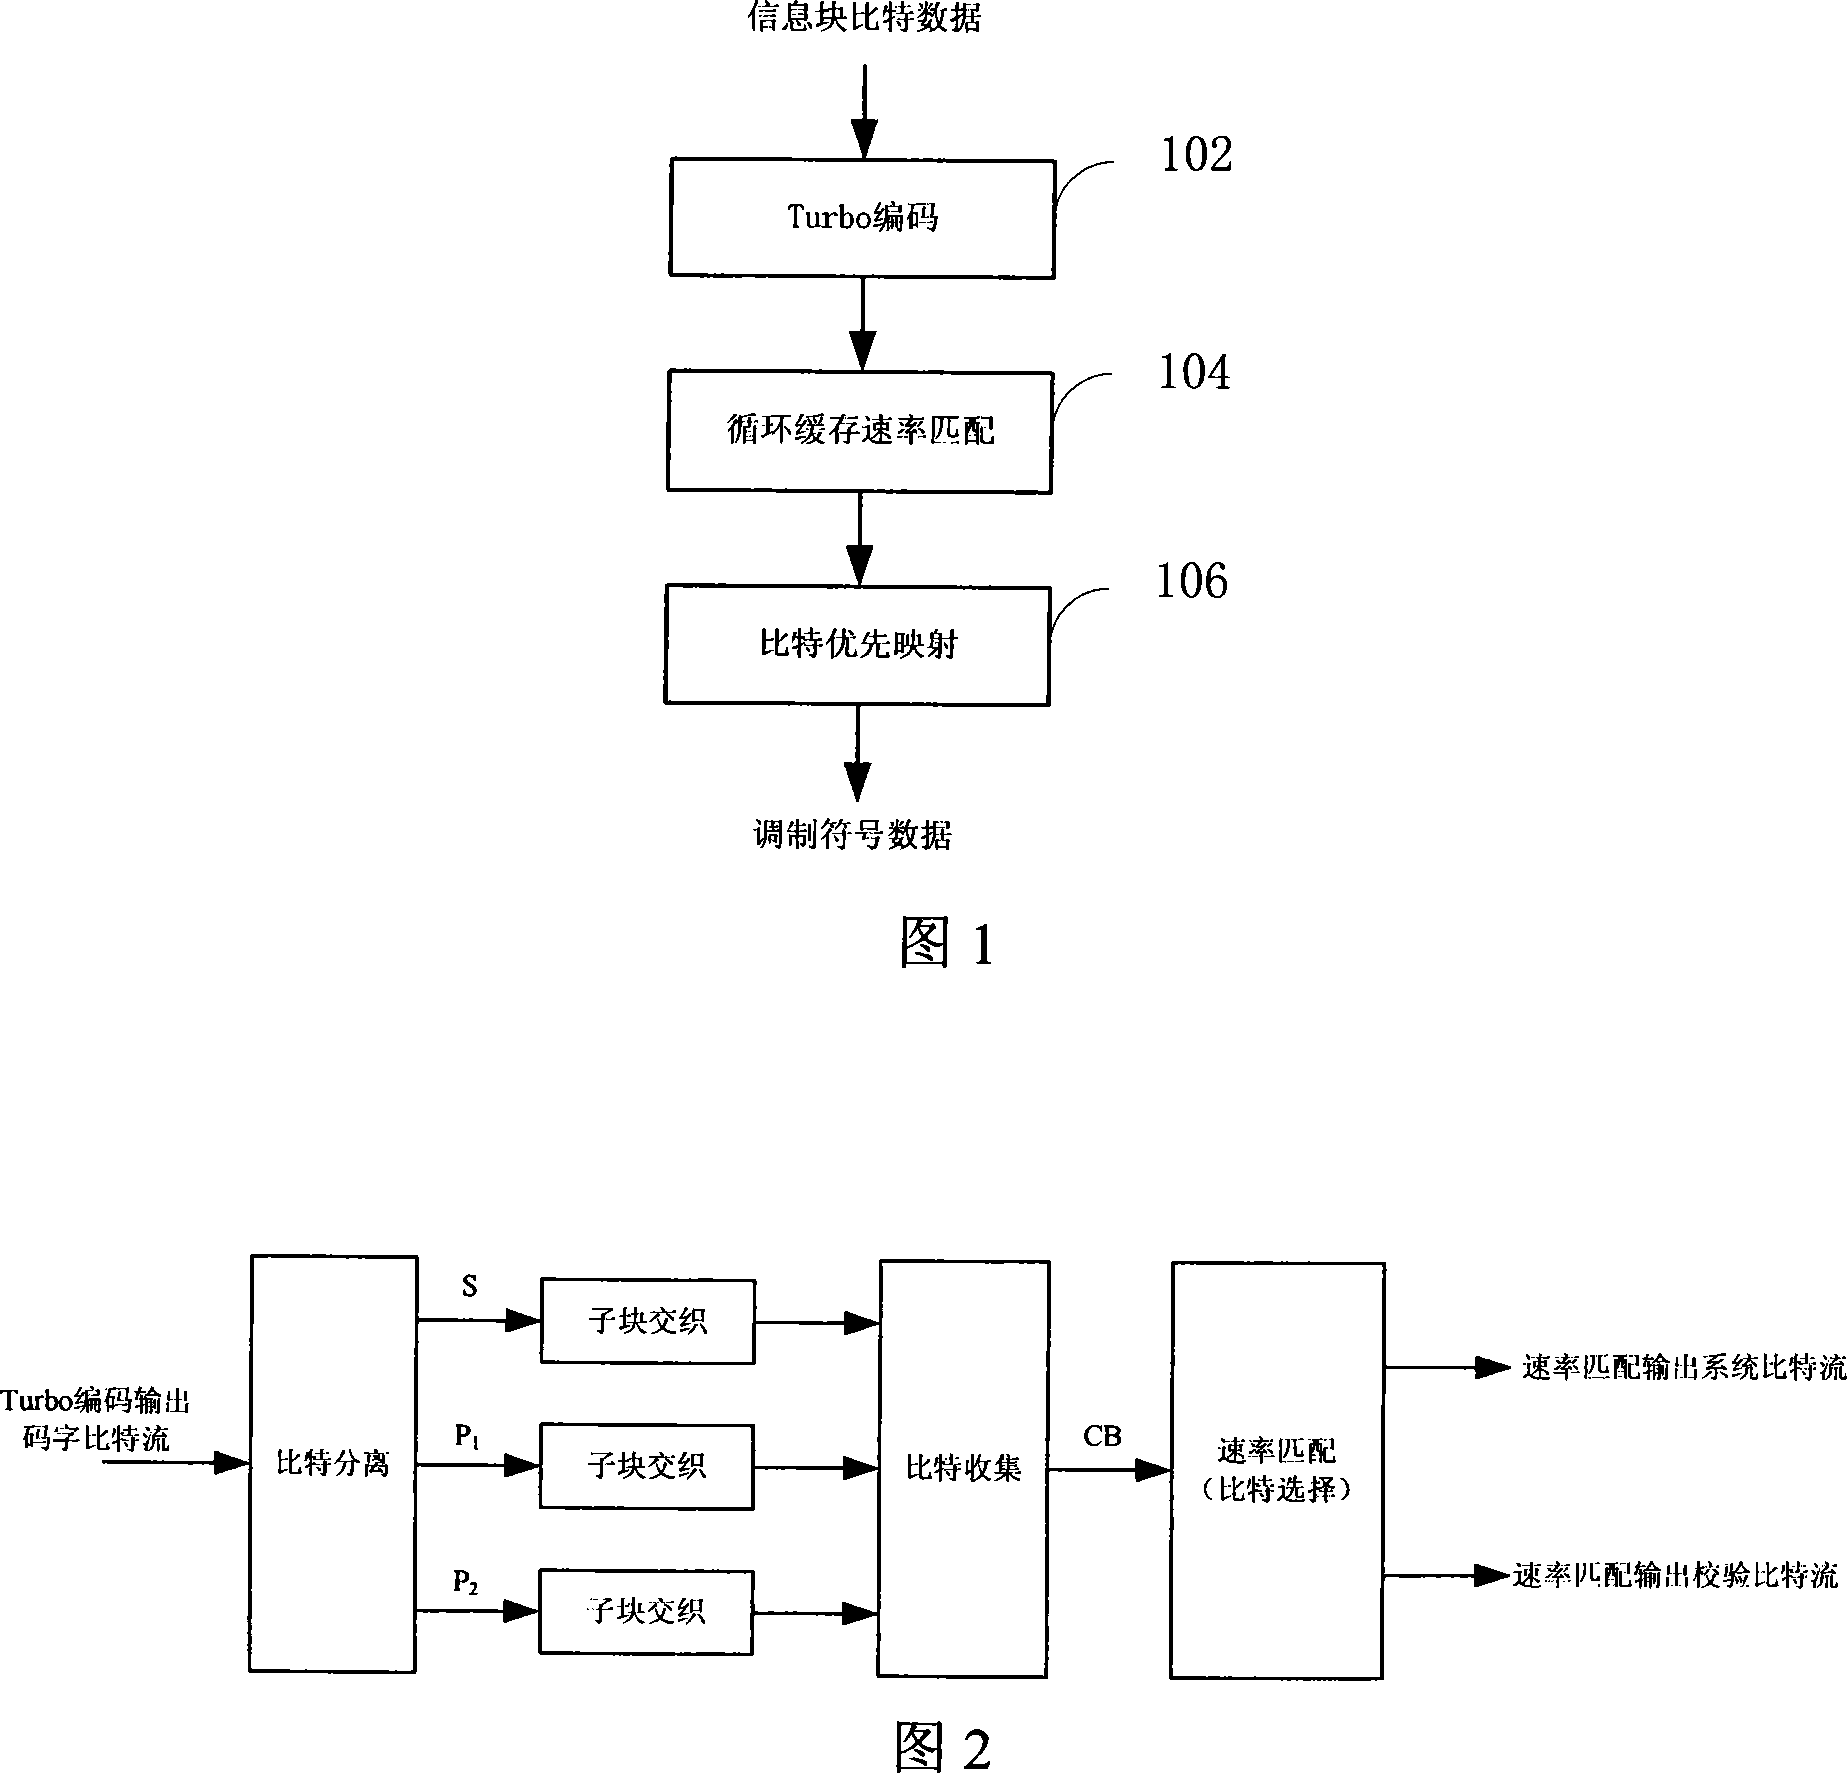 Radio physical layer channel code chain processing method